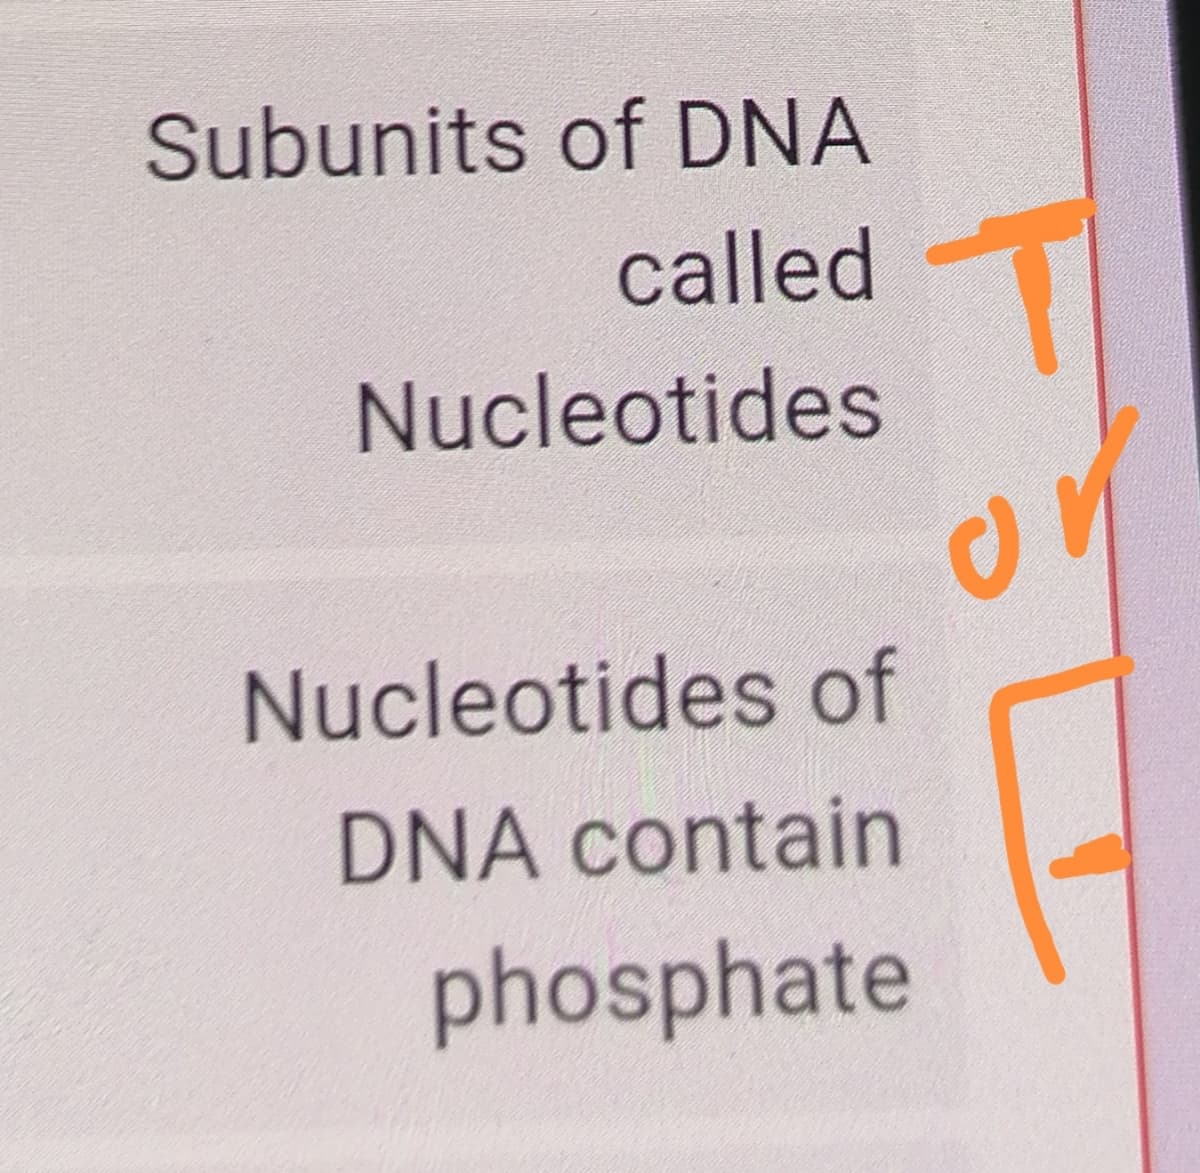 Subunits of DNA
called
Nucleotides
Nucleotides of
DNA contain
phosphate
